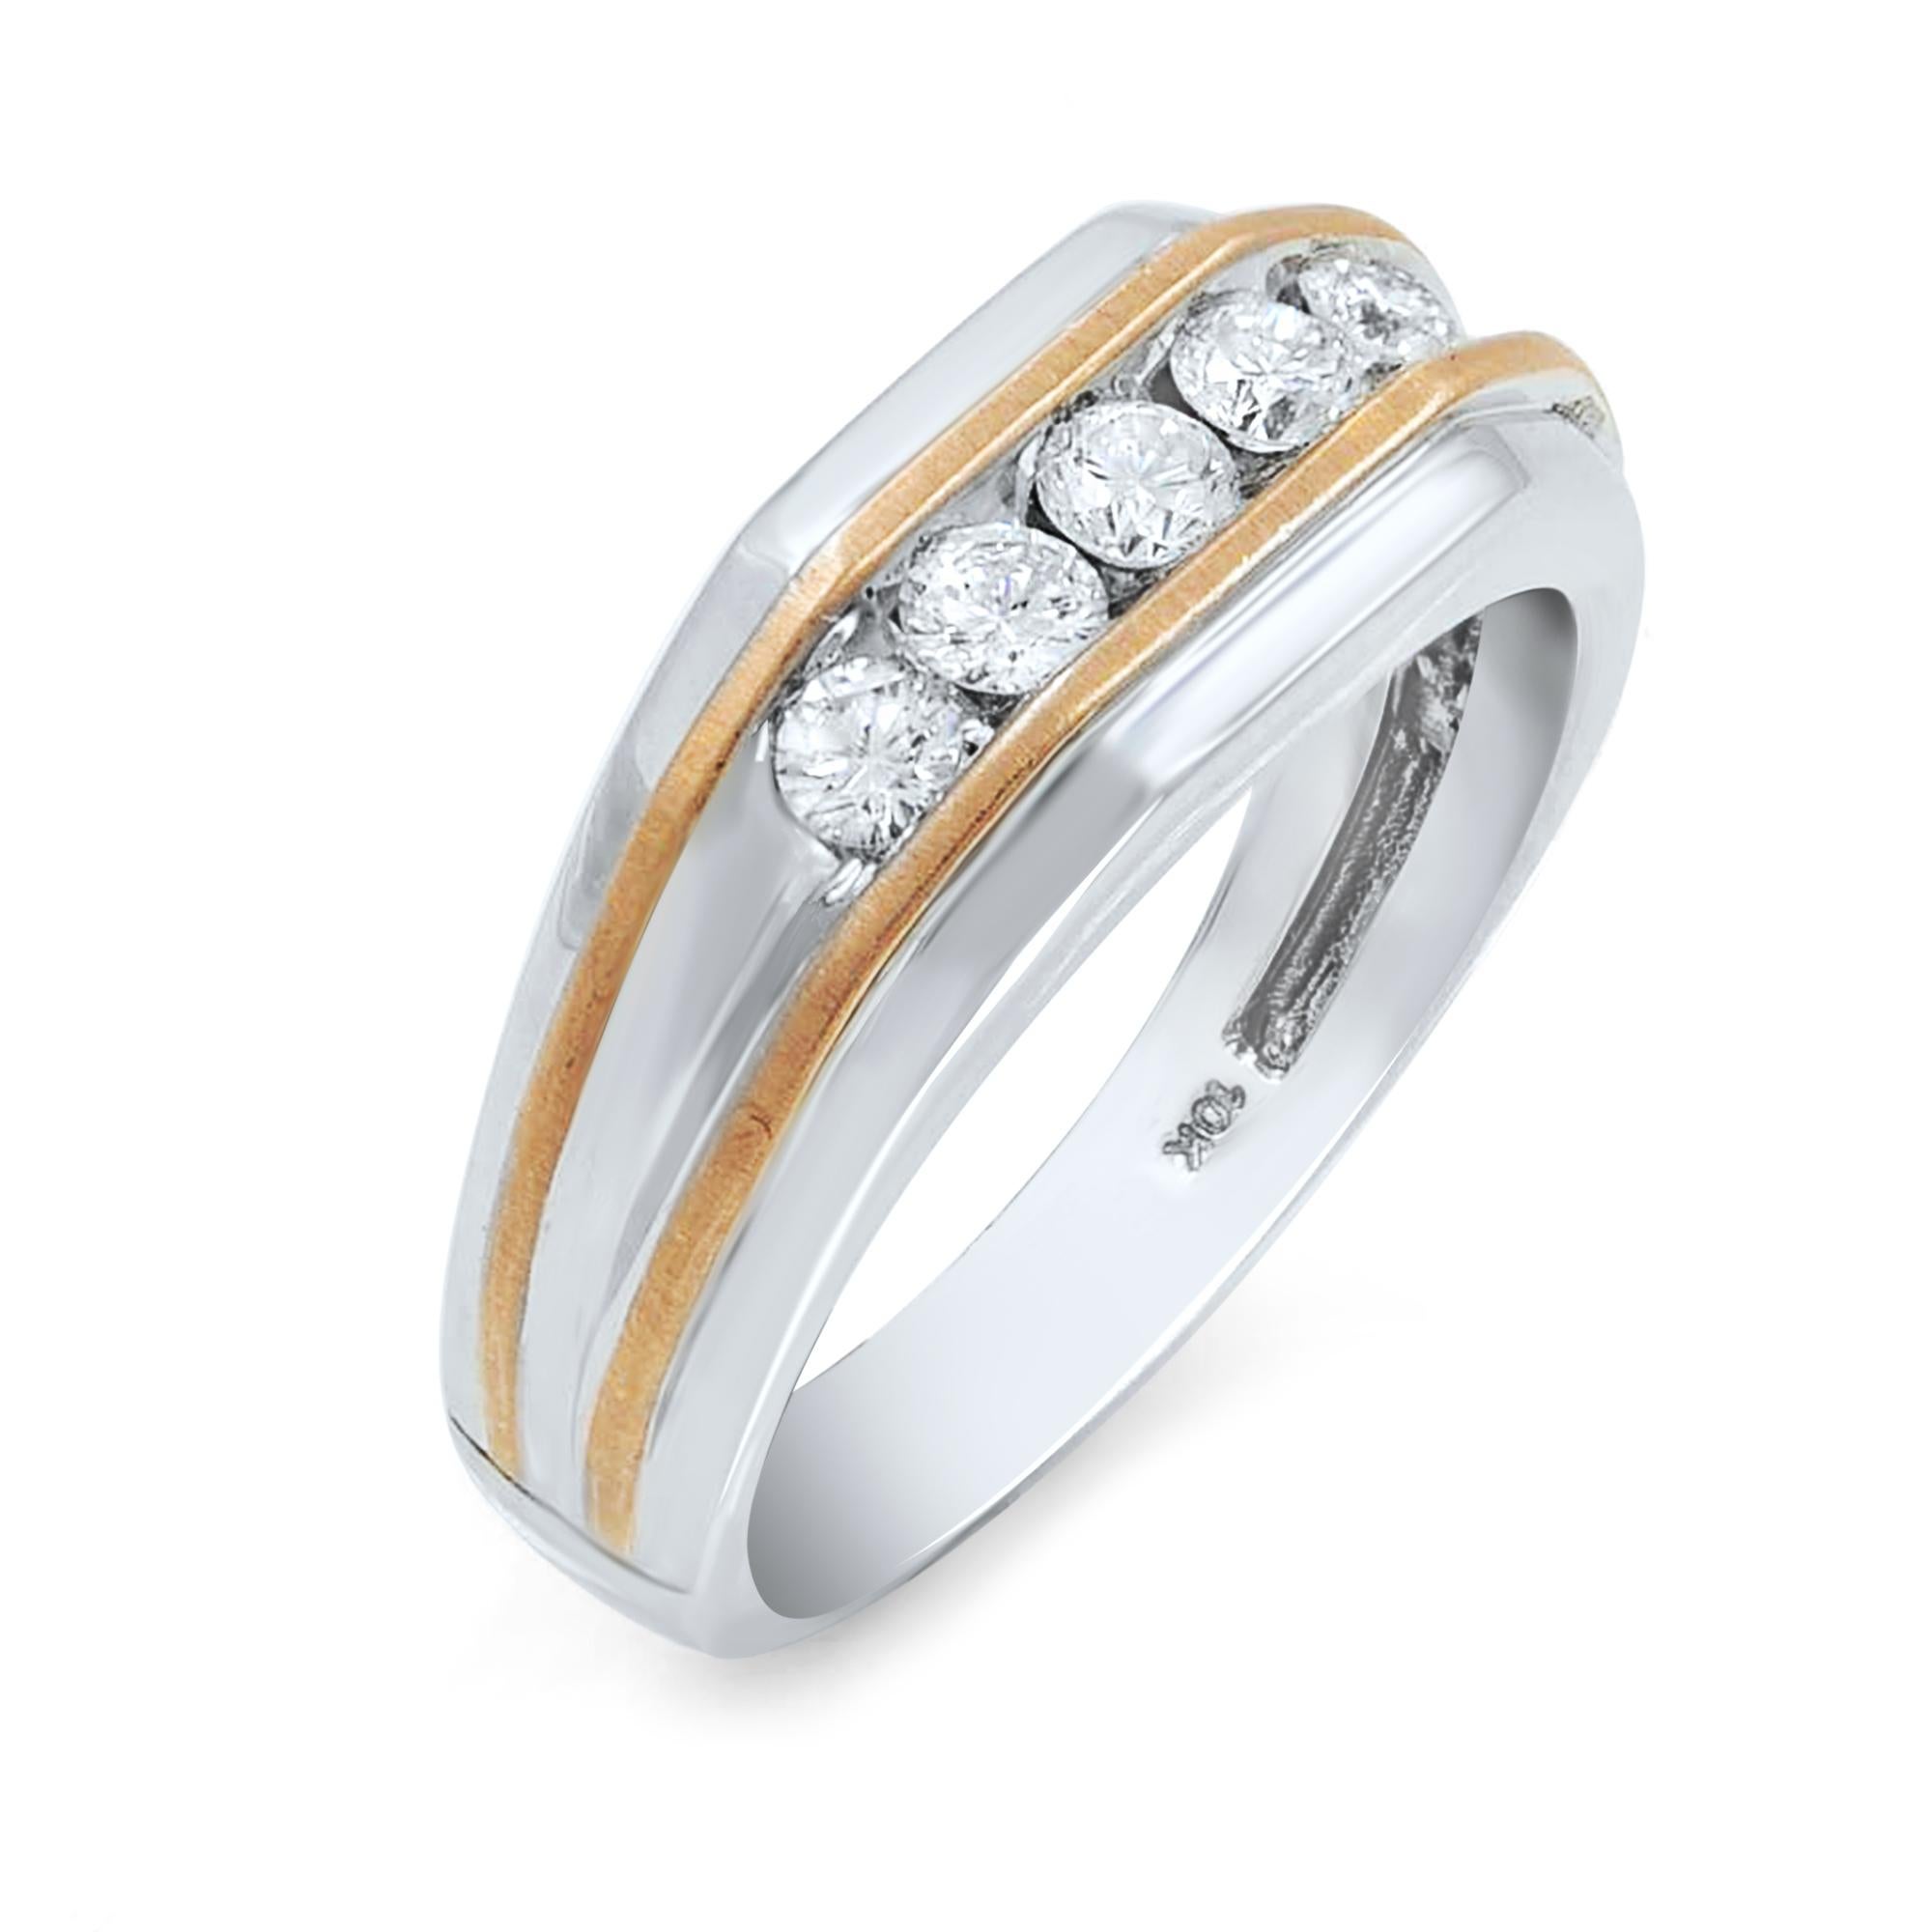 Beautiful five stone diamond ring for your love one. Diamonds are eye clean and actually sparkle nicely. IGI certificate for your insurance. Five round brilliant cut diamonds channel set on top of the band. Two gold groves add a nice touch of modern